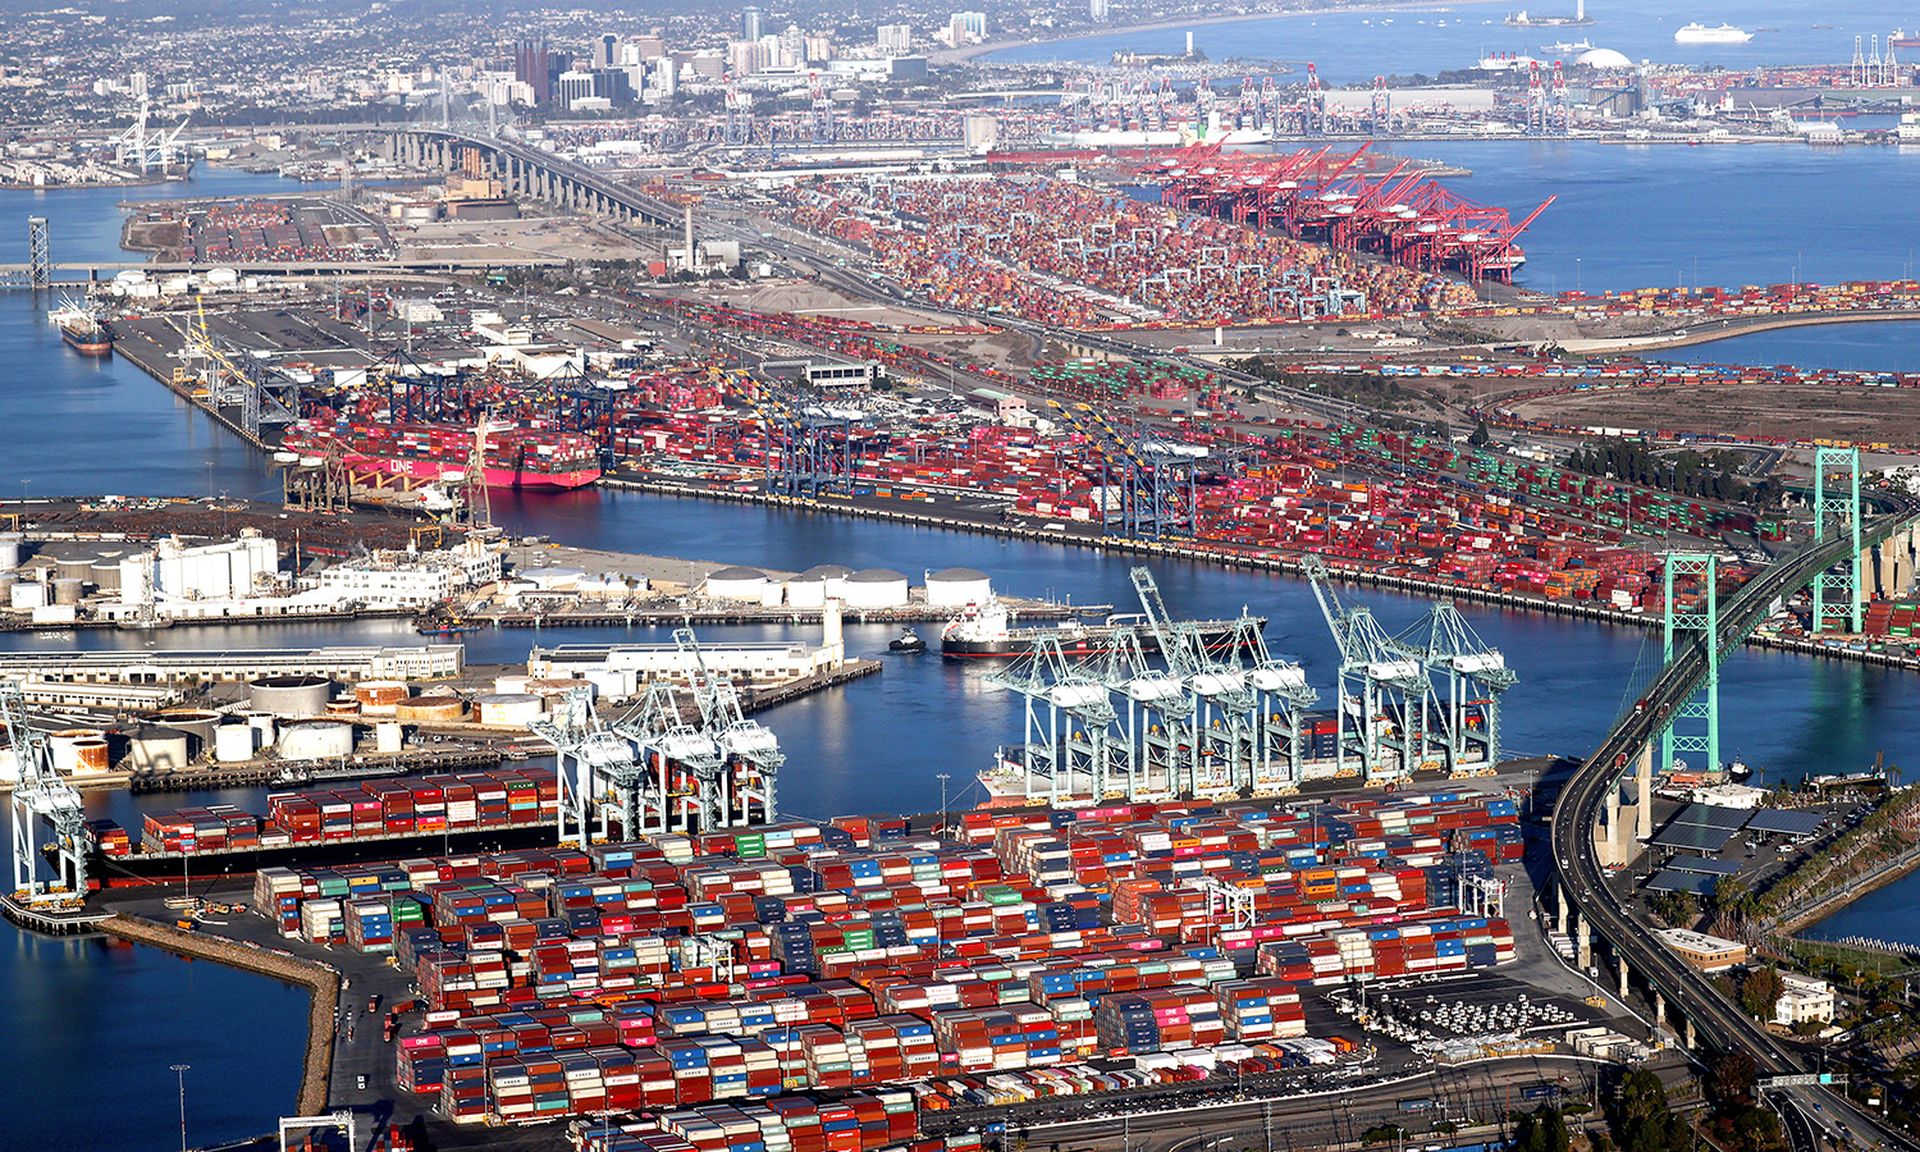 In an aerial view, shipping containers and container ships are seen at the ports of Long Beach and Los Angeles on Sept. 20, 2021, near Los Angeles. Amid nationwide record-high demand for imported goods and supply chain issues, the twin ports of Los Angeles and Long Beach are currently seeing unprecedented congestion. (Photo by Mario Tama/Getty Imag...